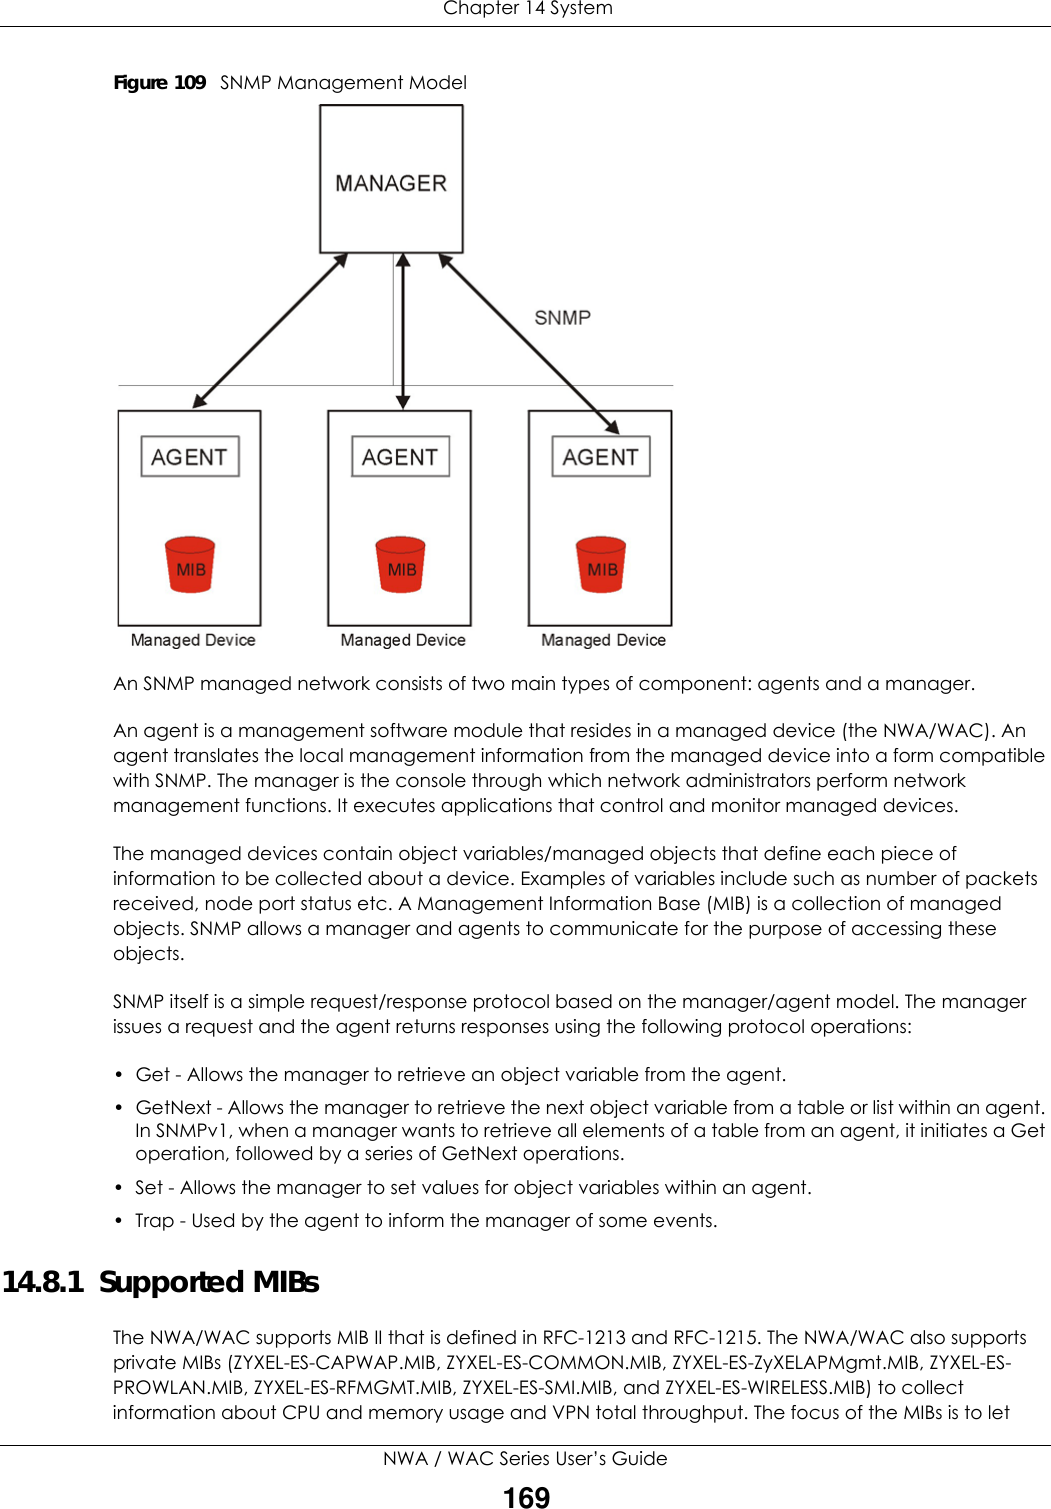  Chapter 14 SystemNWA / WAC Series User’s Guide169Figure 109   SNMP Management ModelAn SNMP managed network consists of two main types of component: agents and a manager. An agent is a management software module that resides in a managed device (the NWA/WAC). An agent translates the local management information from the managed device into a form compatible with SNMP. The manager is the console through which network administrators perform network management functions. It executes applications that control and monitor managed devices. The managed devices contain object variables/managed objects that define each piece of information to be collected about a device. Examples of variables include such as number of packets received, node port status etc. A Management Information Base (MIB) is a collection of managed objects. SNMP allows a manager and agents to communicate for the purpose of accessing these objects.SNMP itself is a simple request/response protocol based on the manager/agent model. The manager issues a request and the agent returns responses using the following protocol operations:• Get - Allows the manager to retrieve an object variable from the agent. • GetNext - Allows the manager to retrieve the next object variable from a table or list within an agent. In SNMPv1, when a manager wants to retrieve all elements of a table from an agent, it initiates a Get operation, followed by a series of GetNext operations. • Set - Allows the manager to set values for object variables within an agent. • Trap - Used by the agent to inform the manager of some events.14.8.1  Supported MIBsThe NWA/WAC supports MIB II that is defined in RFC-1213 and RFC-1215. The NWA/WAC also supports private MIBs (ZYXEL-ES-CAPWAP.MIB, ZYXEL-ES-COMMON.MIB, ZYXEL-ES-ZyXELAPMgmt.MIB, ZYXEL-ES-PROWLAN.MIB, ZYXEL-ES-RFMGMT.MIB, ZYXEL-ES-SMI.MIB, and ZYXEL-ES-WIRELESS.MIB) to collect information about CPU and memory usage and VPN total throughput. The focus of the MIBs is to let 